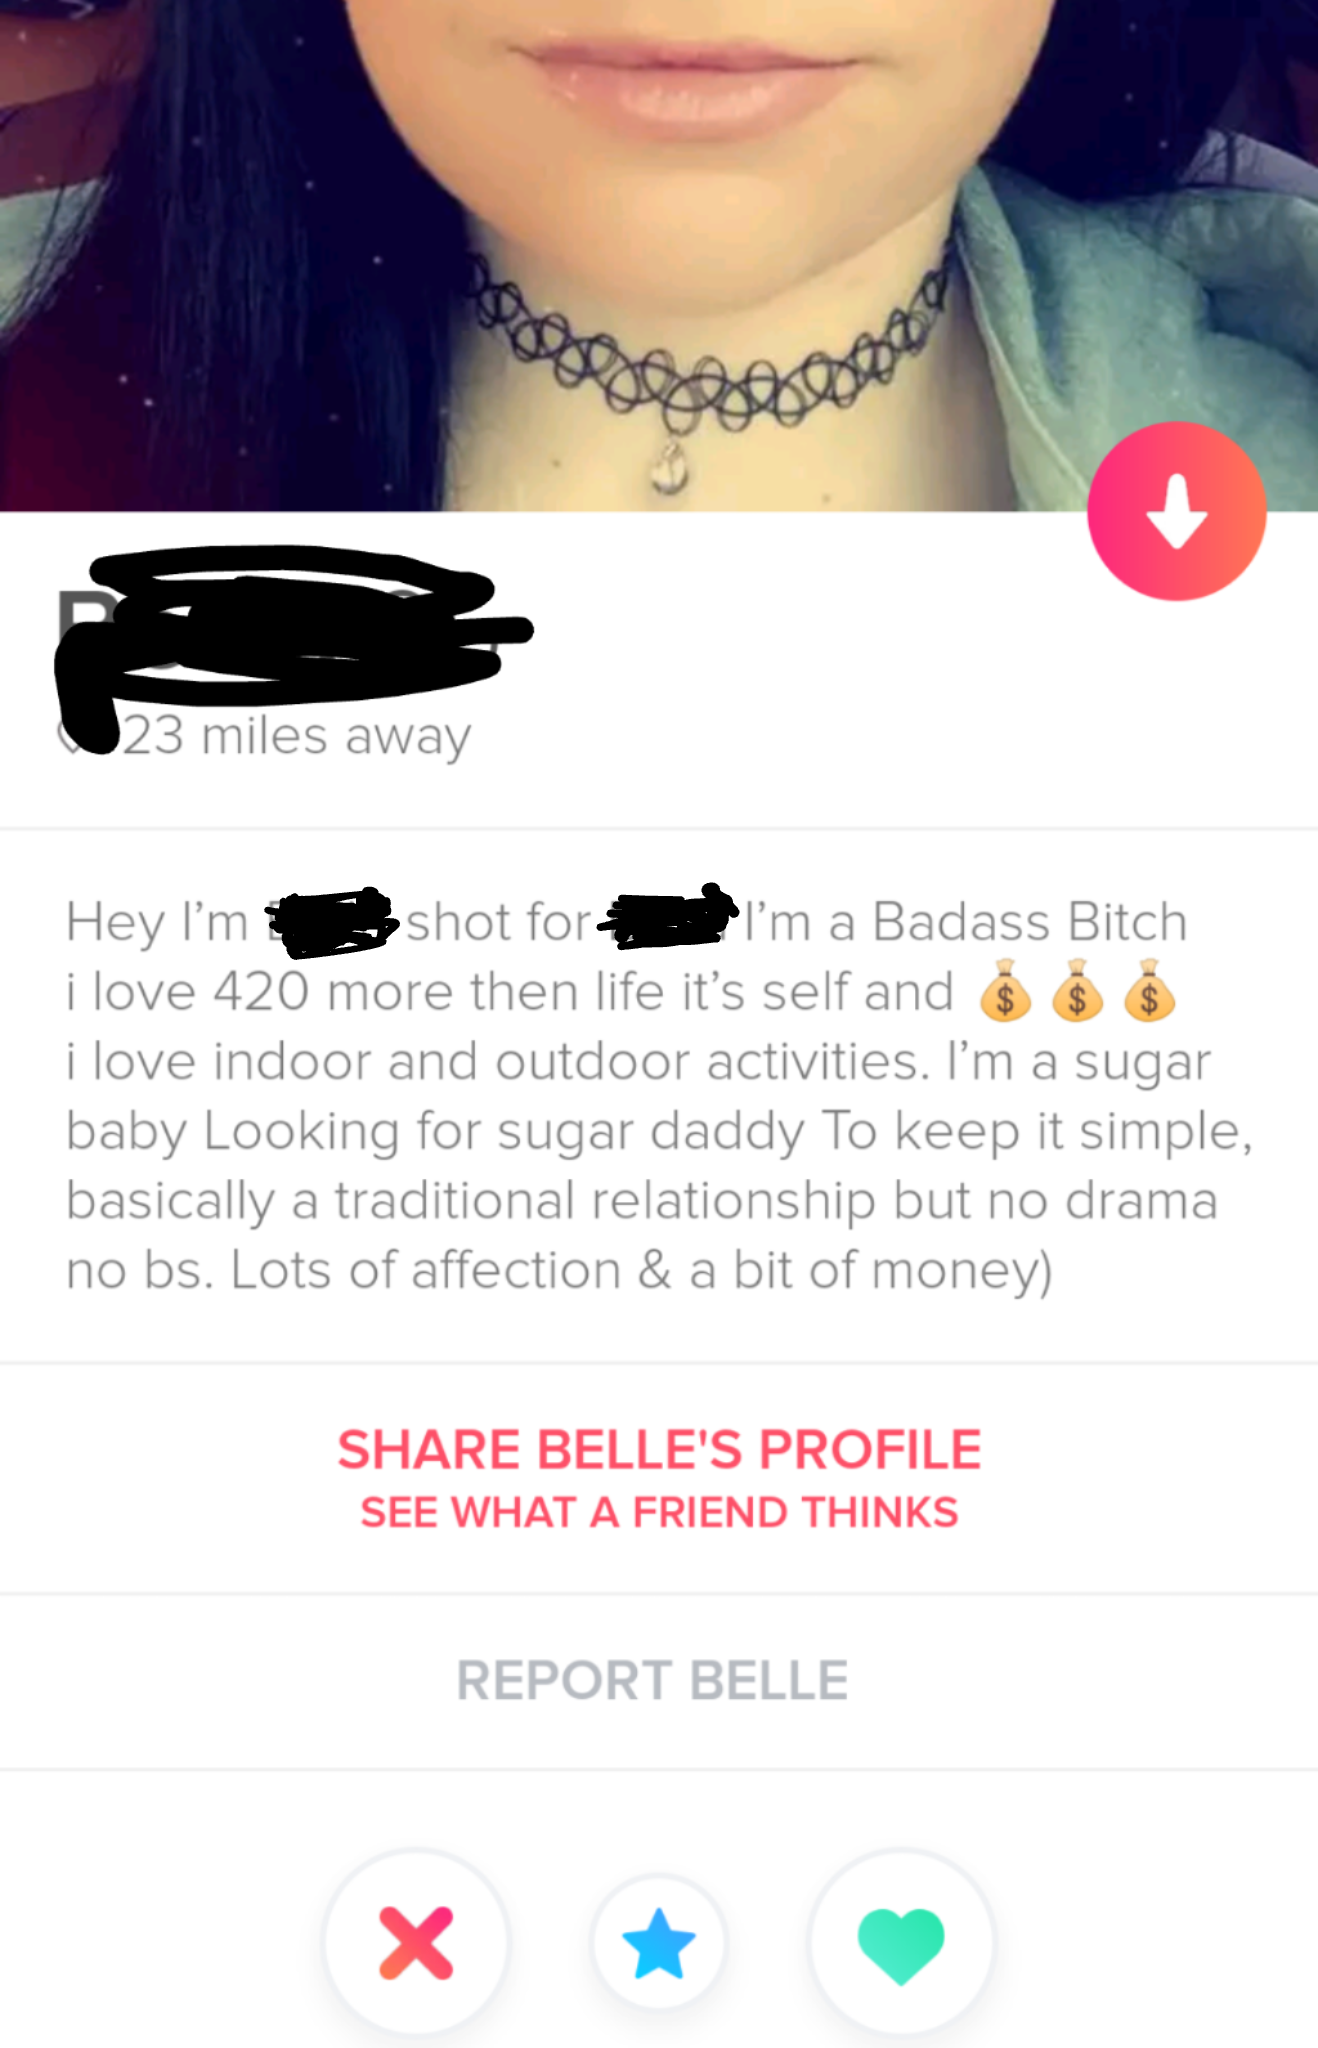 shameless tinder - SoloHey I' m shot form a Badass Bitch I love 420 more then life it's self and $$$ I love indoor and outdoor activities. I'm a sugar baby Looking for sugar daddy To keep it simple, basically a traditional relationship but no drama no b